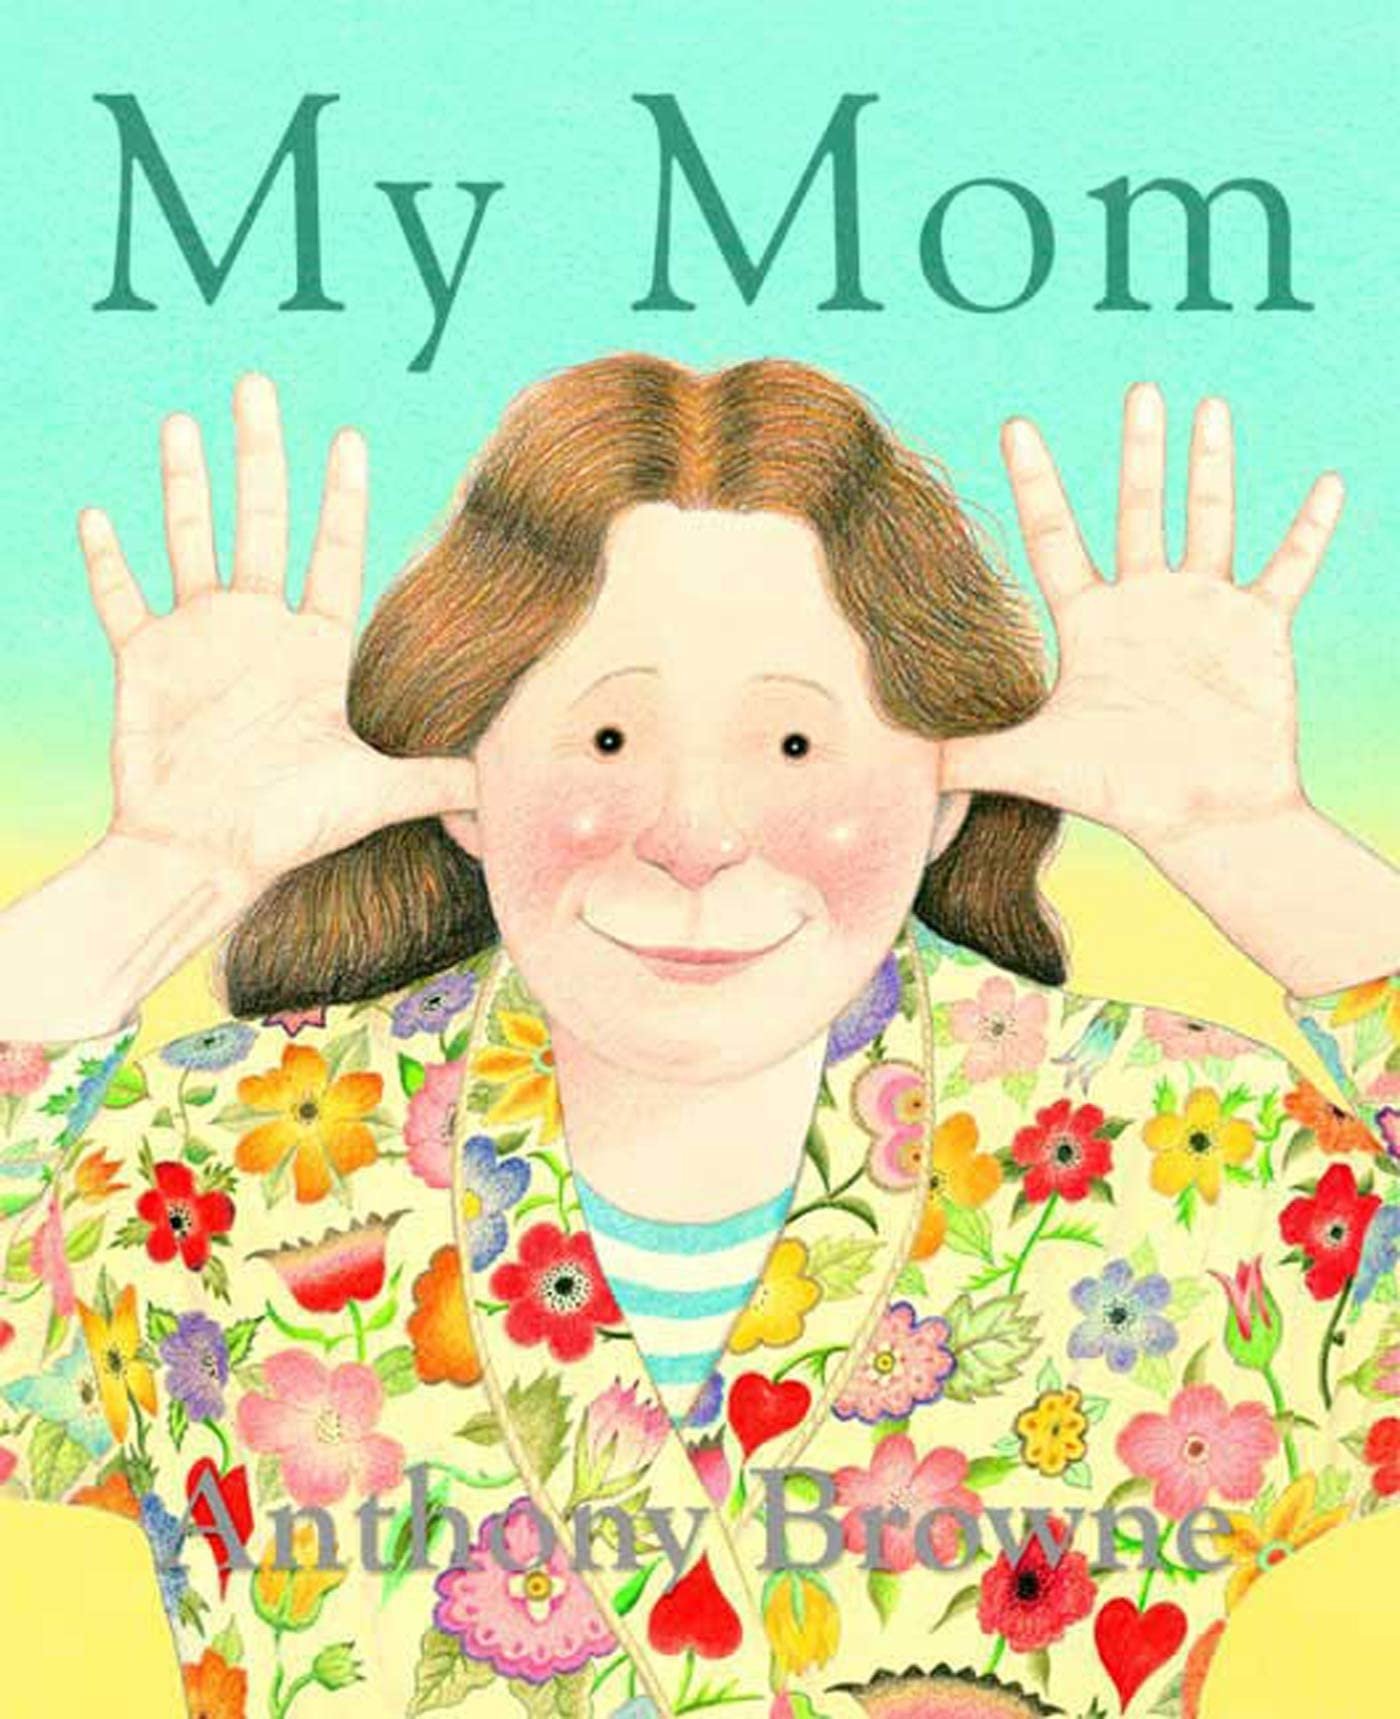 My Mom by Anthony Browne